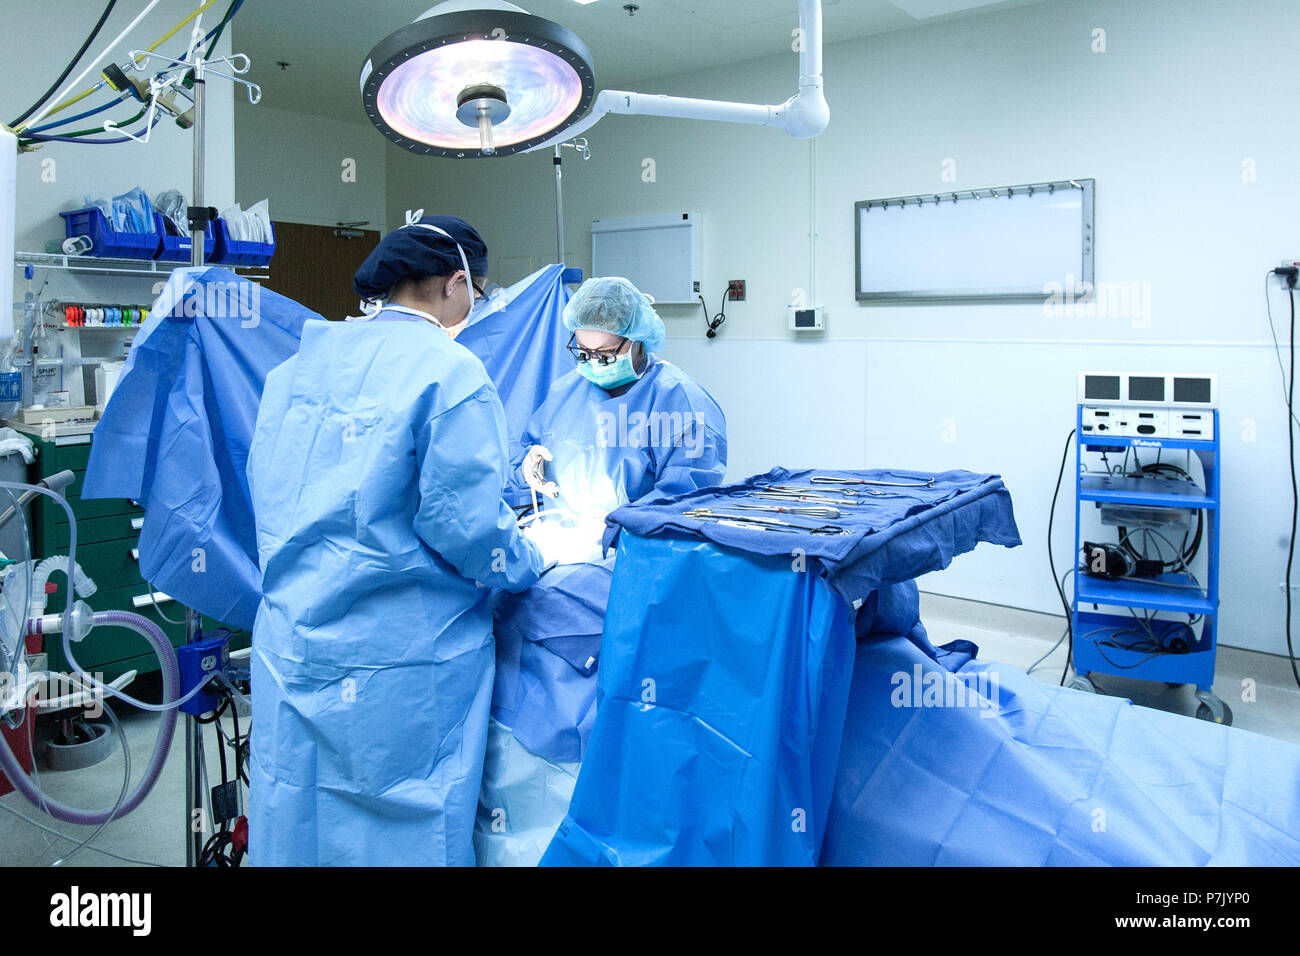 Surgical Procedure Being Performed In Operating Room Stock Photo